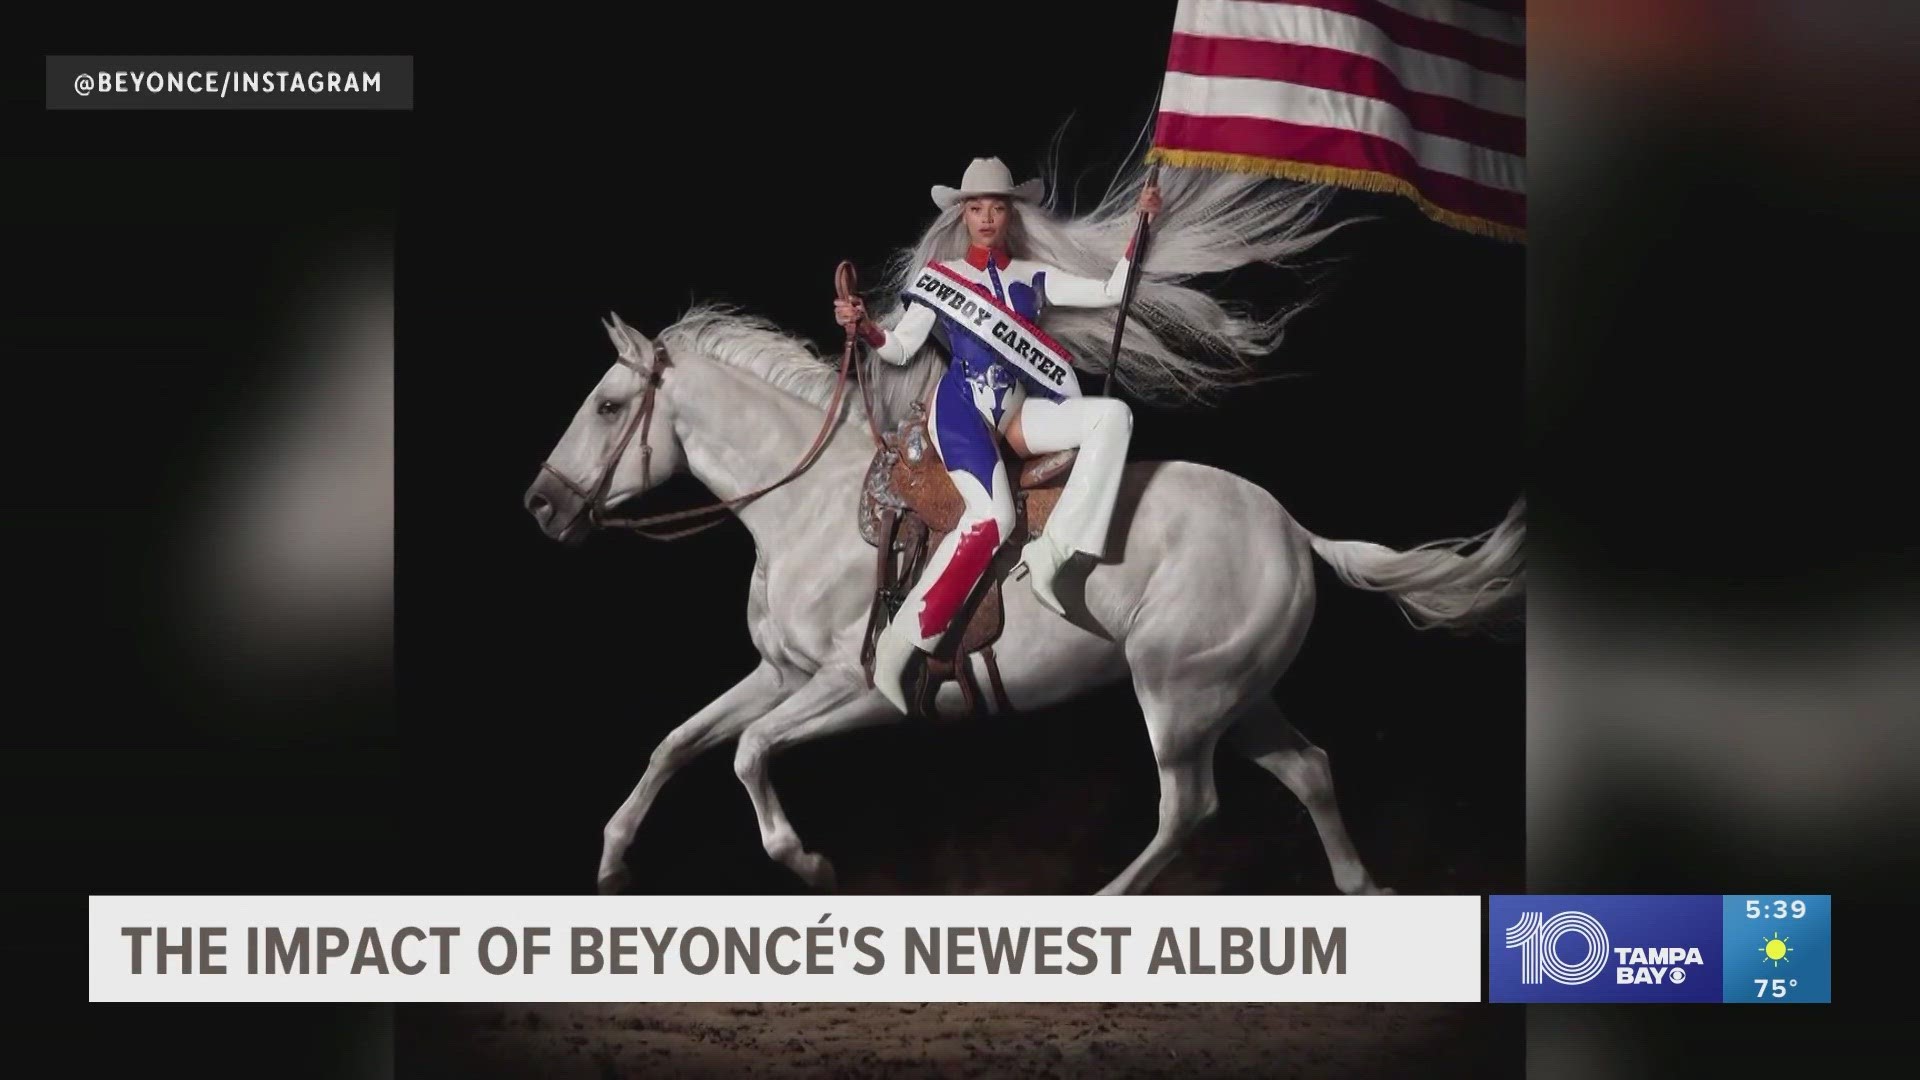 Beyoncé, a Texas native, is no stranger to Country. And Country music is full of Black artists, even if many have been overlooked in the genre's history.